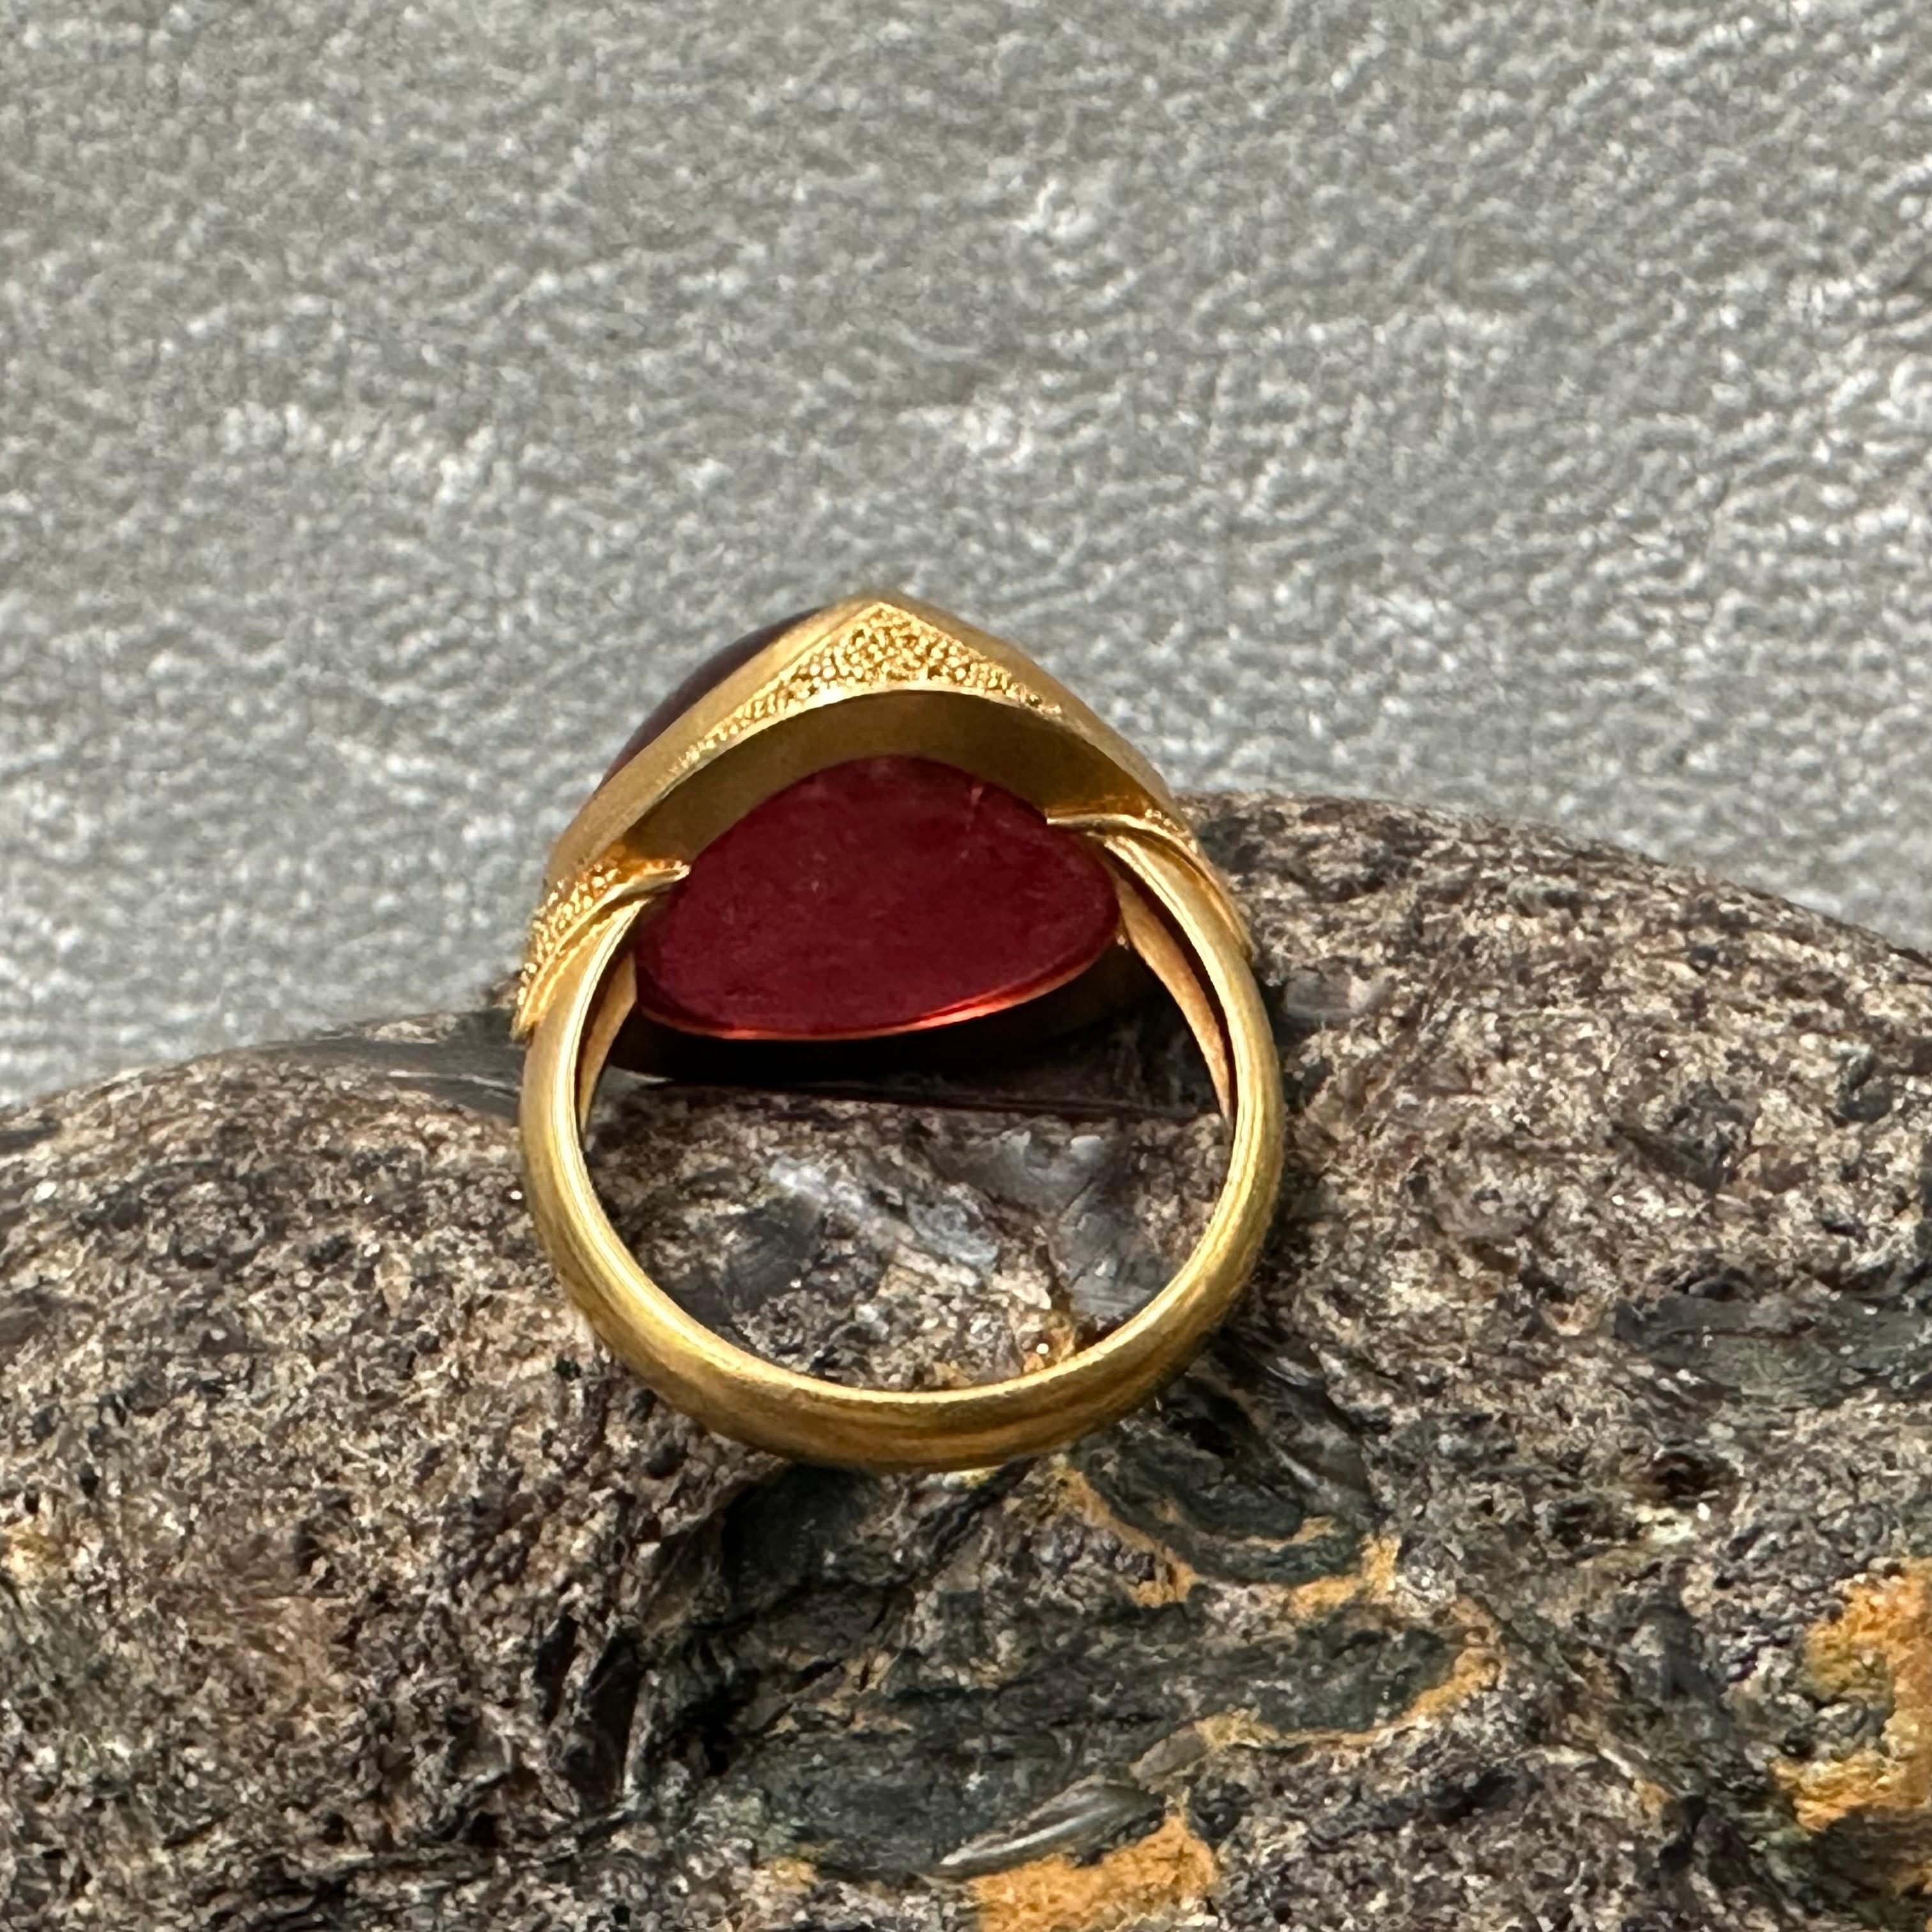 22.2 Carats Cabochon Pink Tourmaline 22k Gold Ring For Sale 7